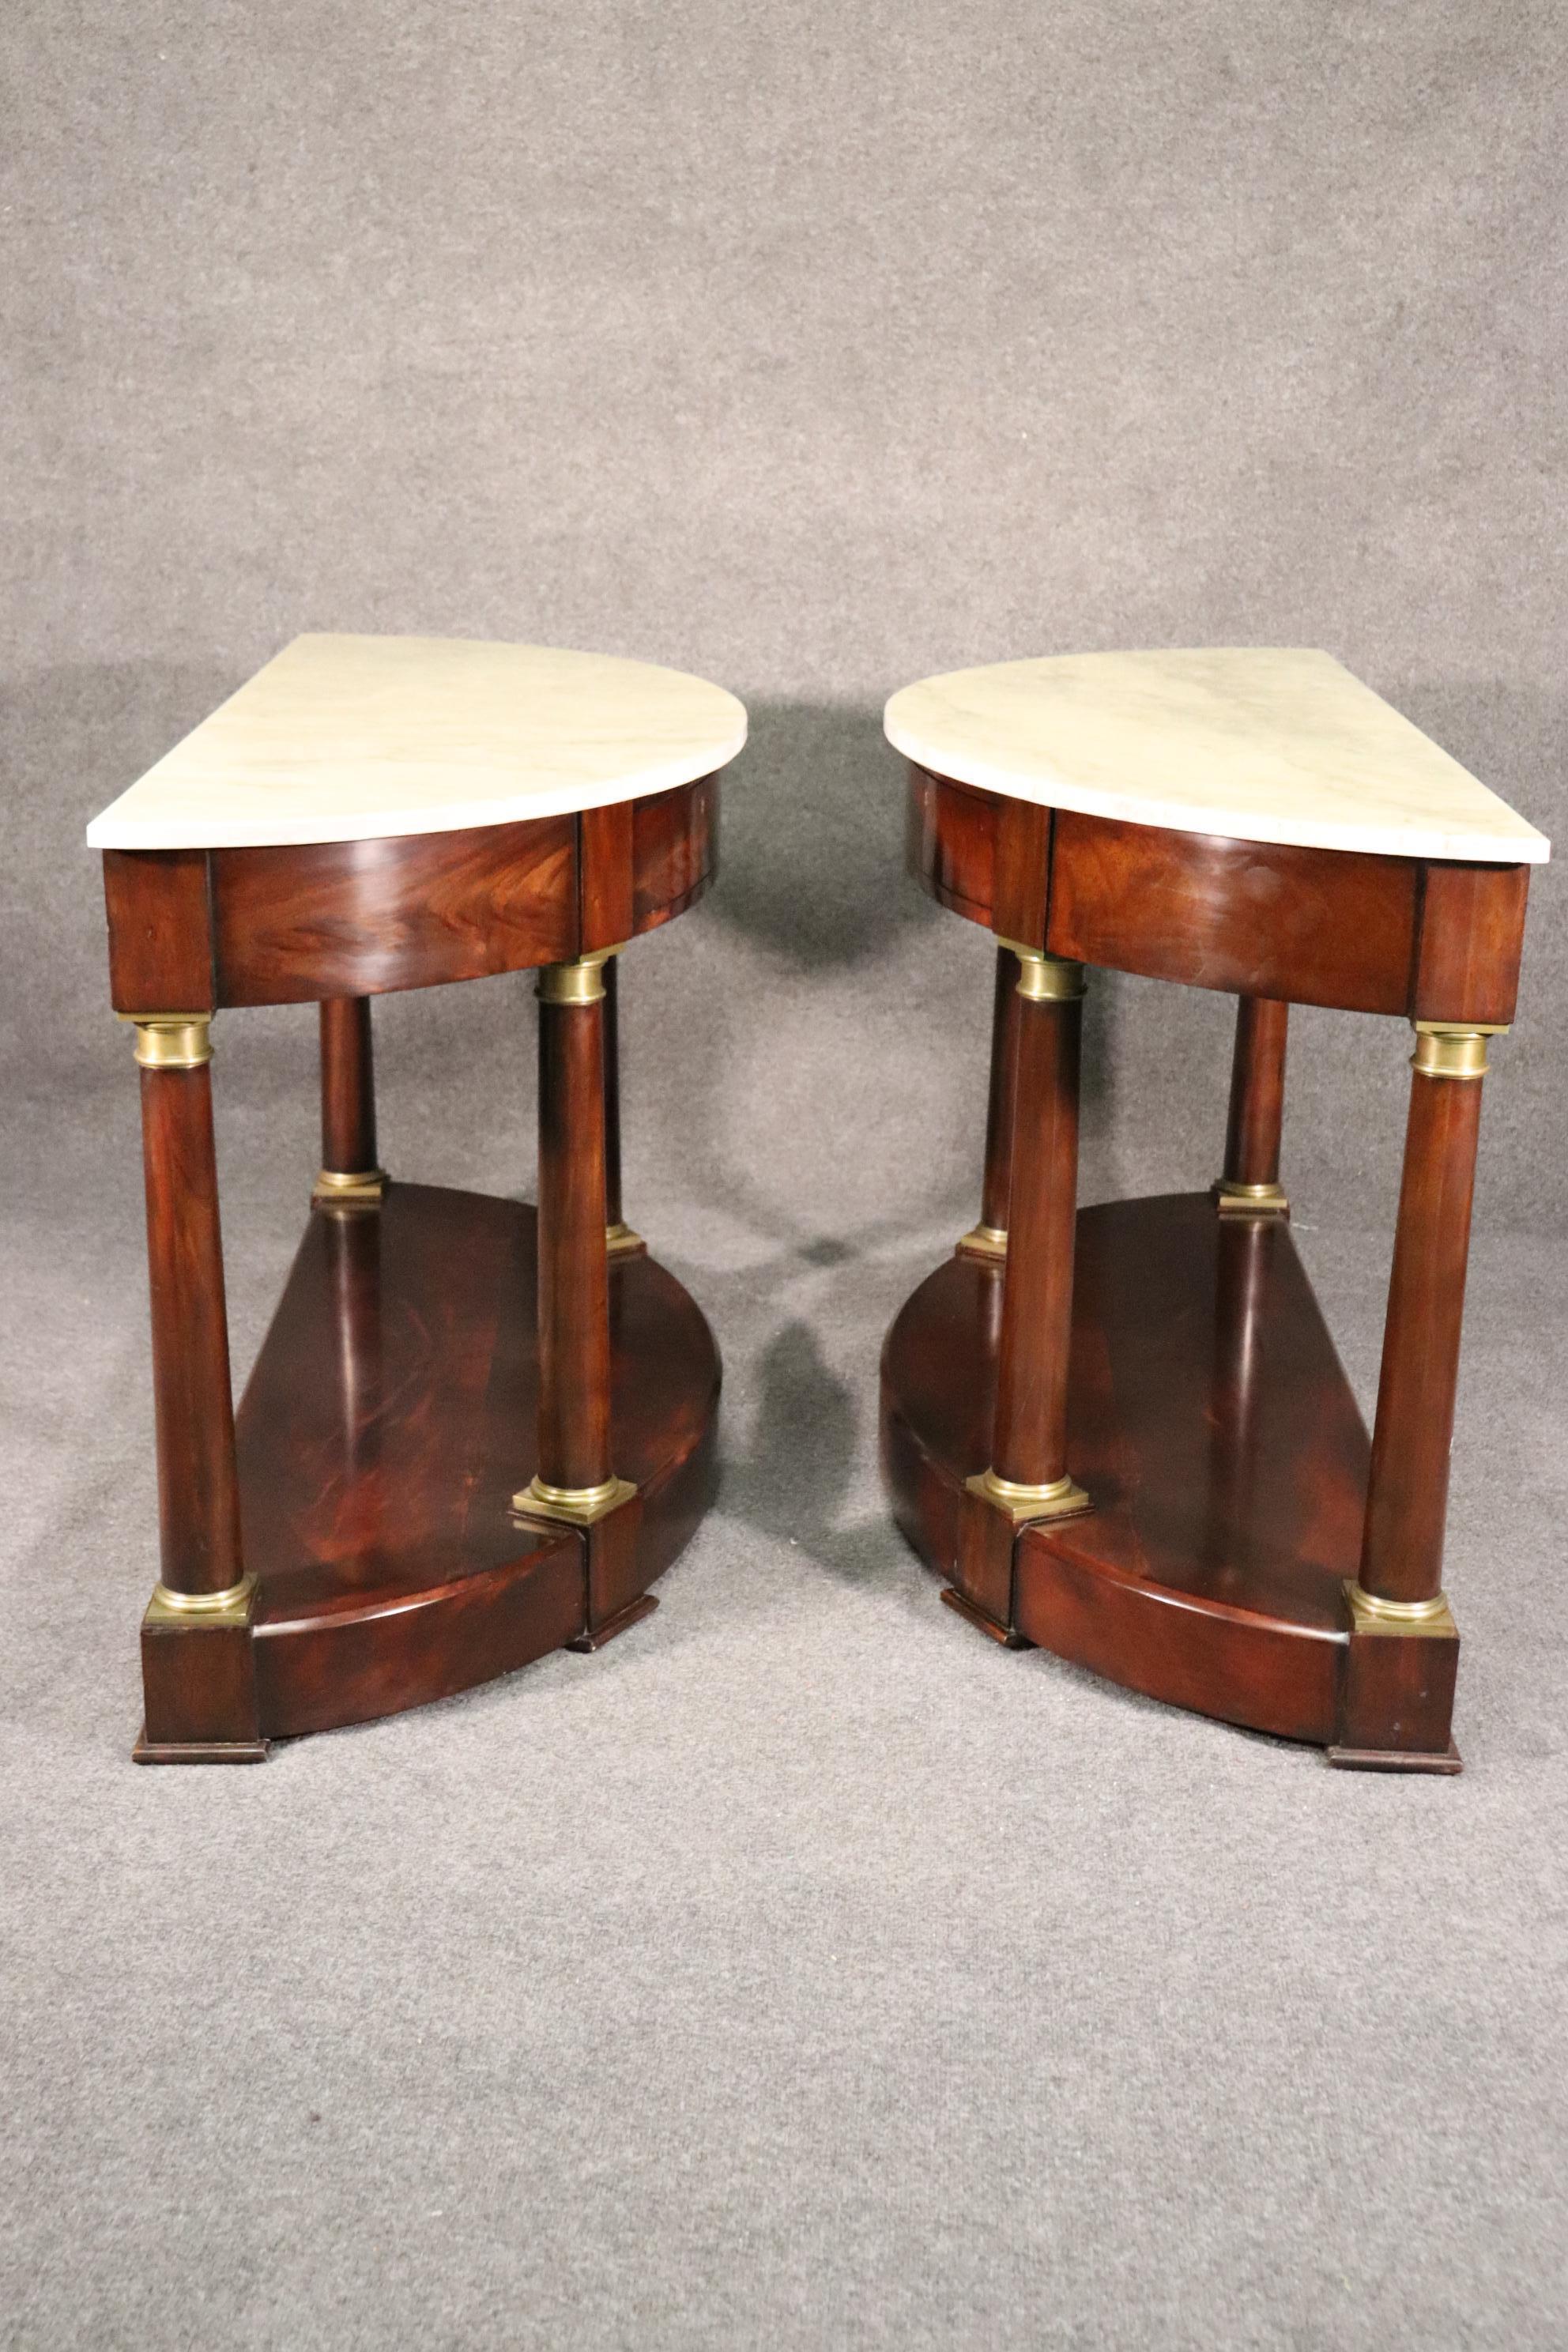 This is a gorgeous pair of Lillian August for Hickory White furniture mahogany and faux painted marble top demilune console tables. The tables are in good original condition and date to the 2000s era and are very gently used. The tables measure 56